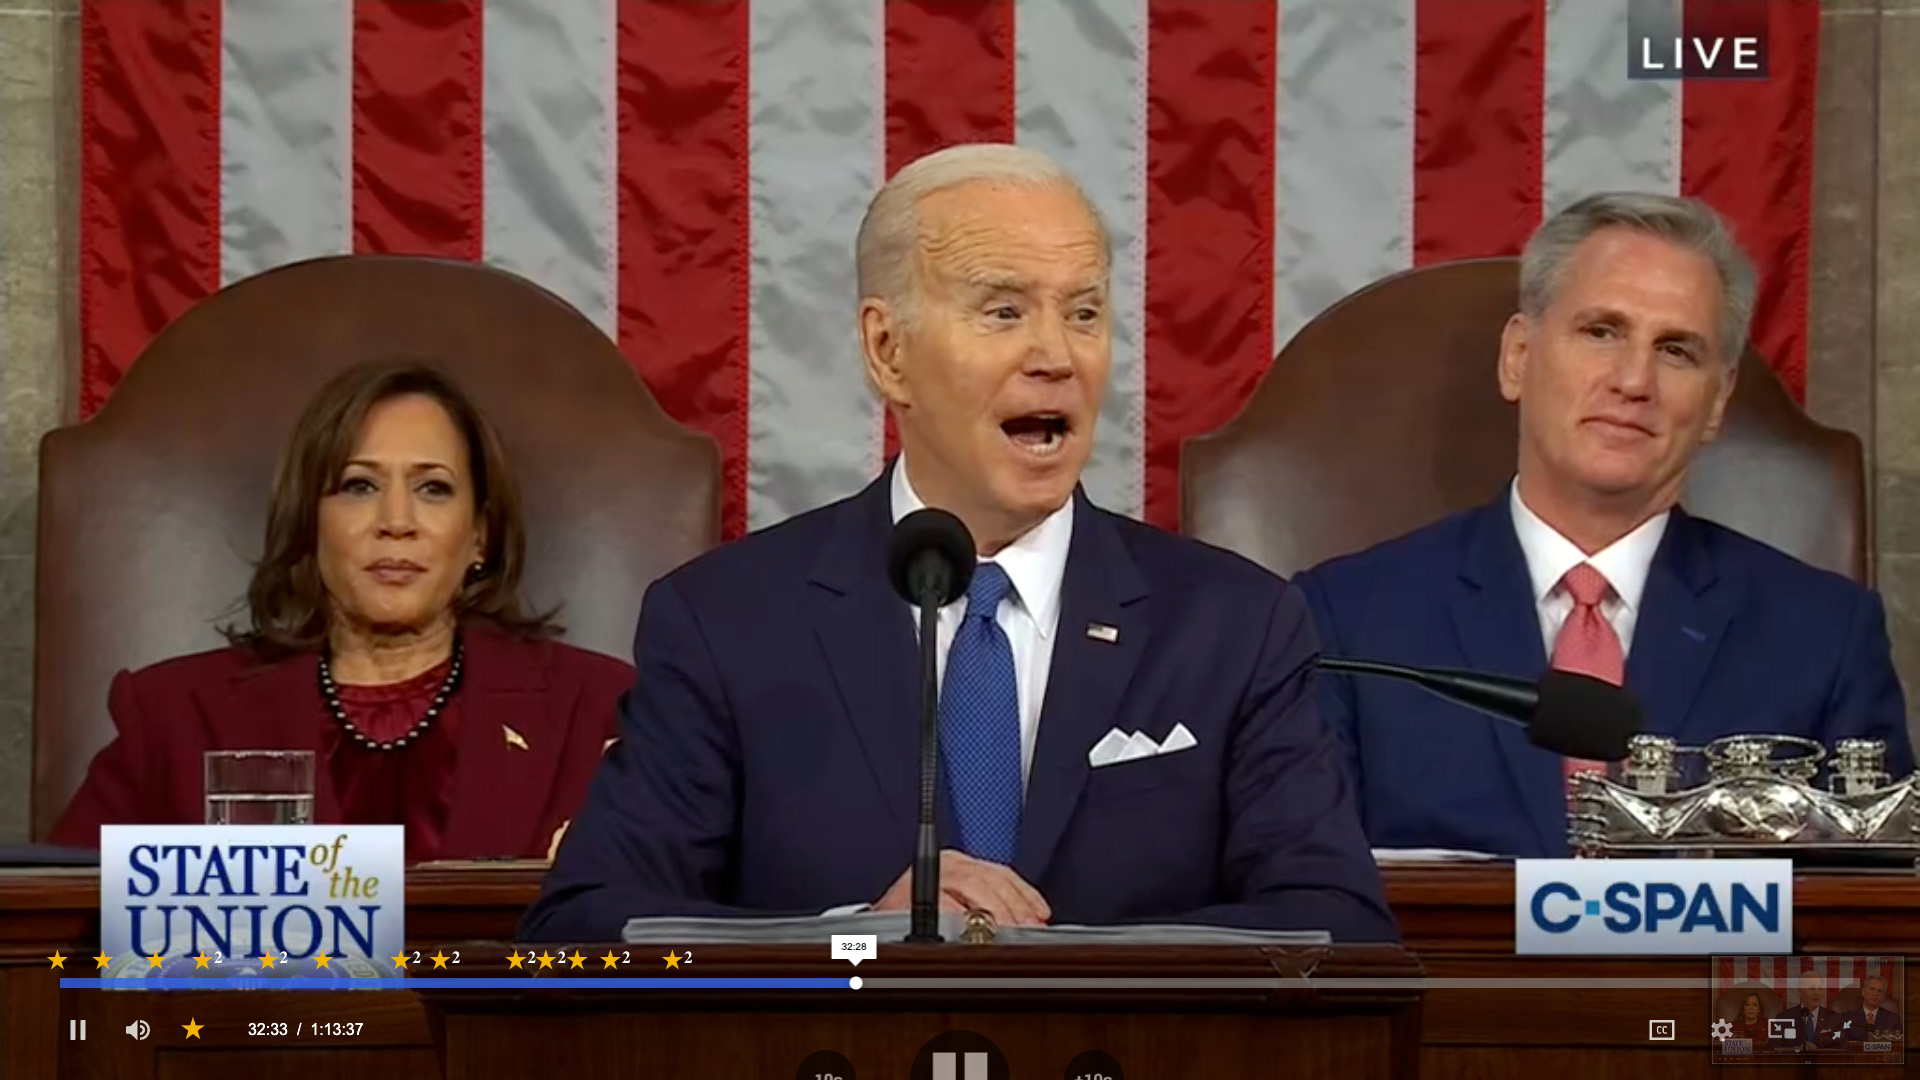 Why is He Yelling? Reflections on the 2023 State of the Union Address